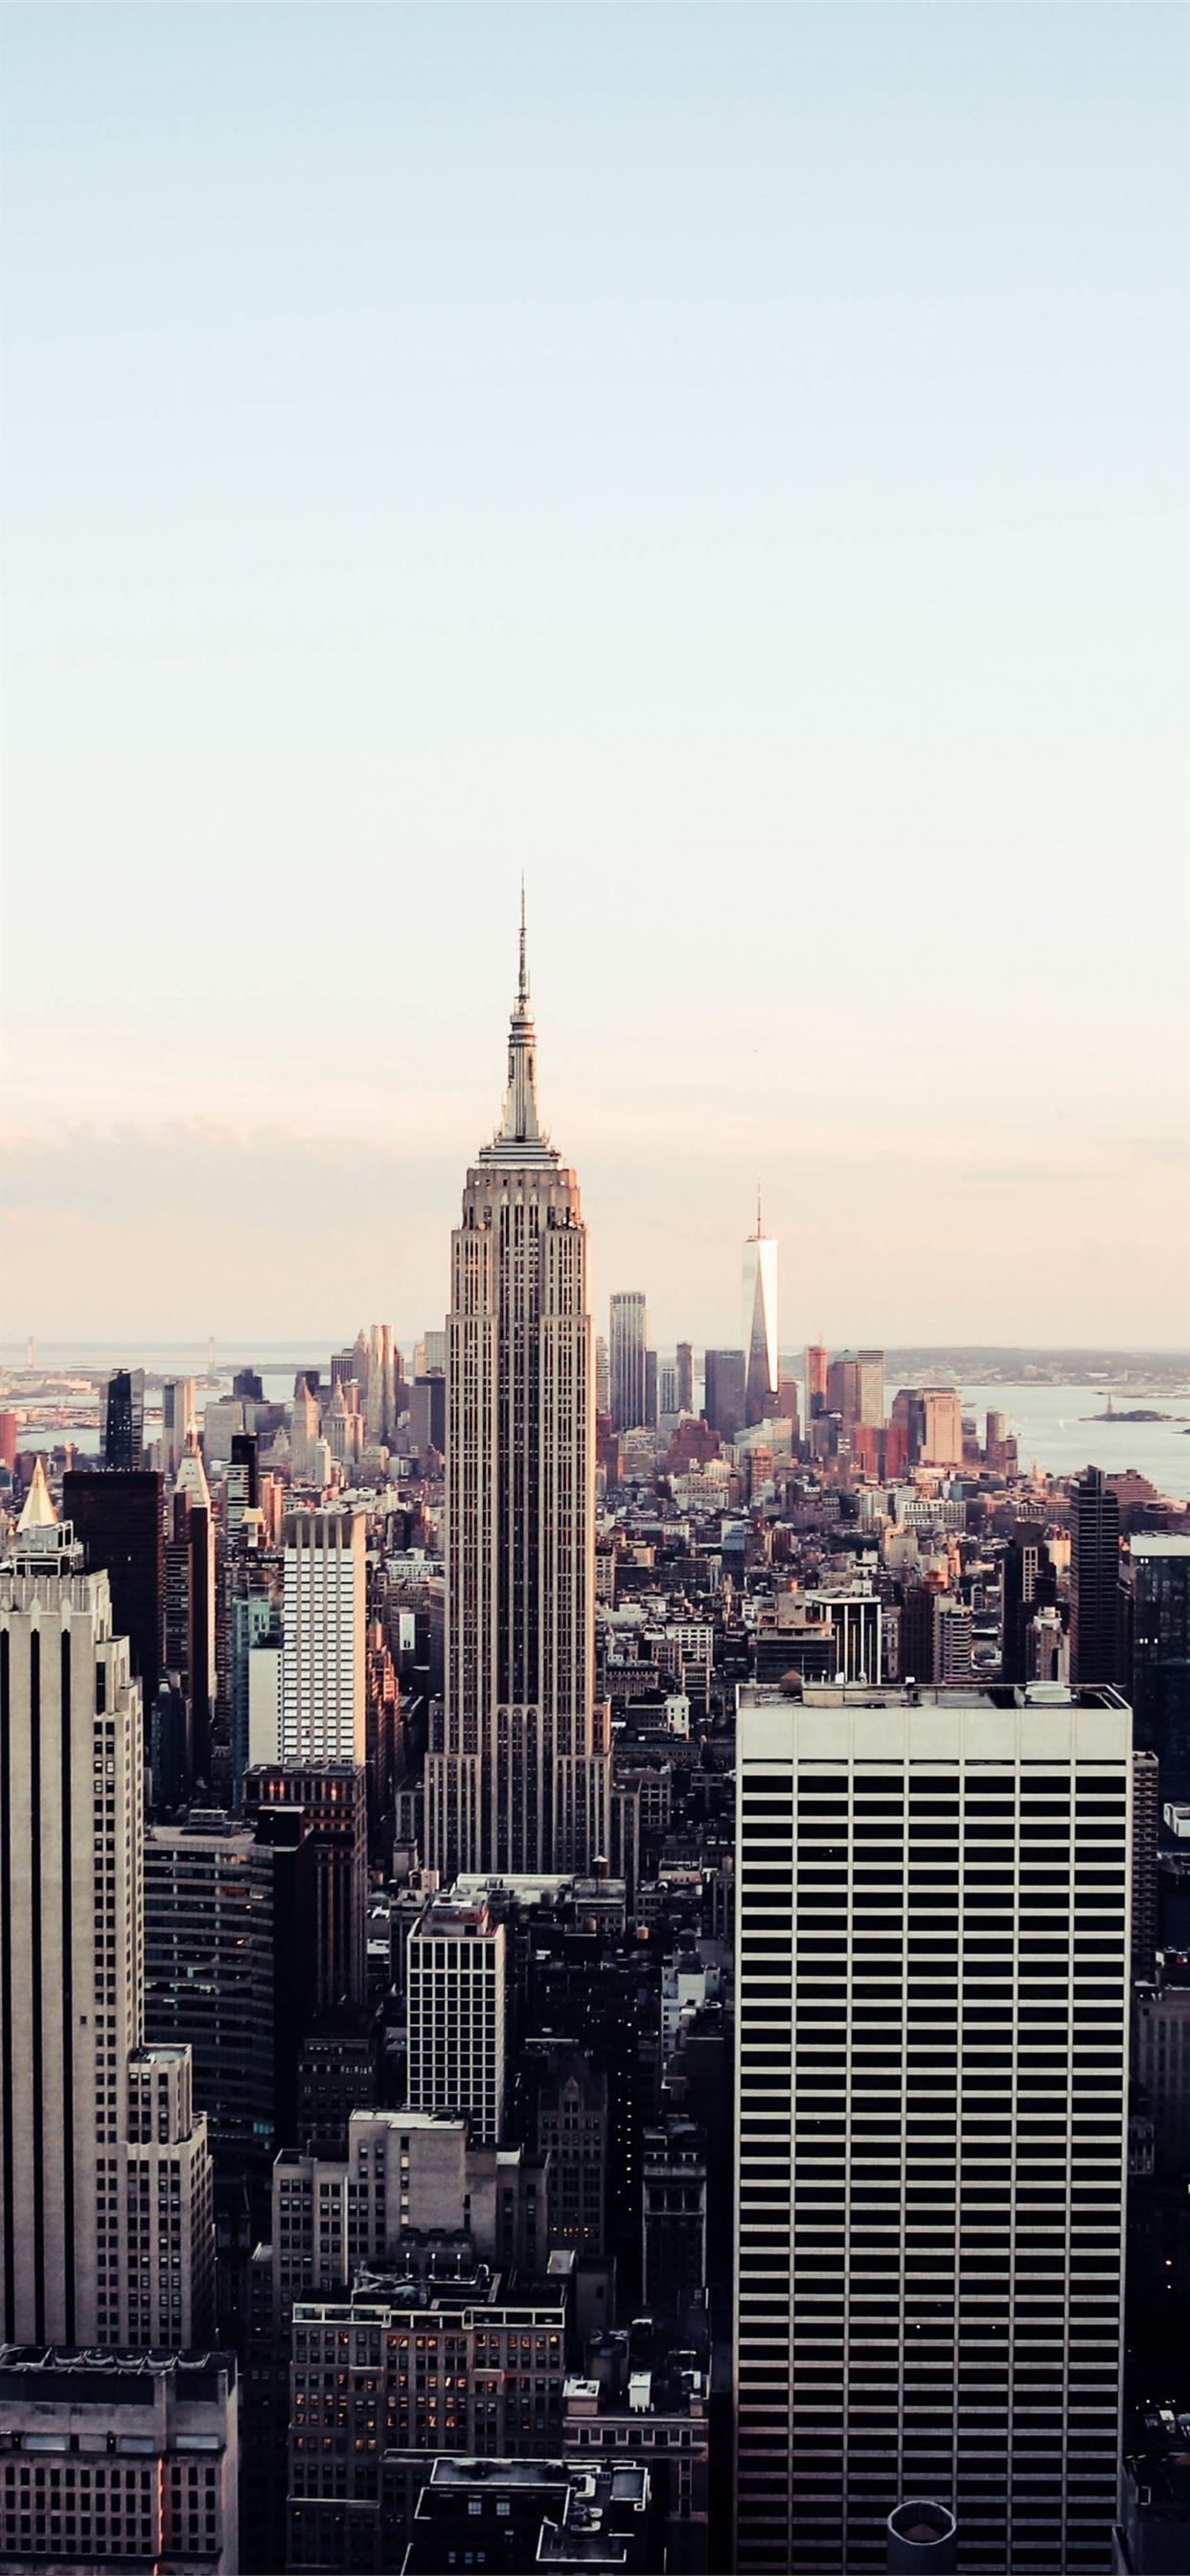 IPhone wallpaper of the Empire State Building in New York City - New York, cityscape